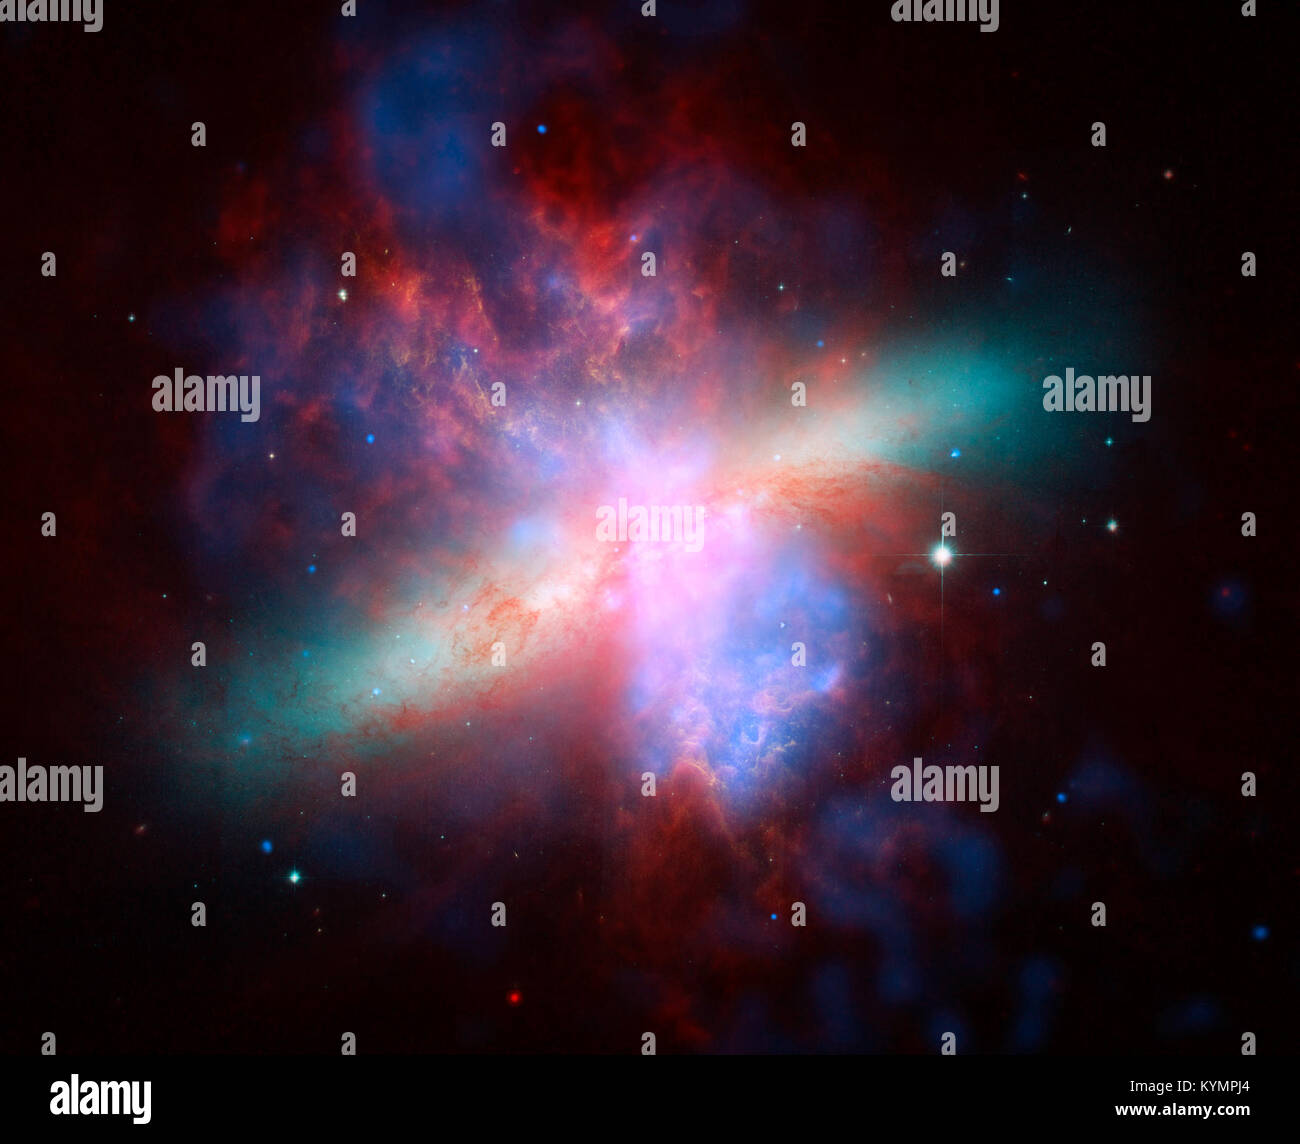 M82 Images From Space Telescopes Produce Stunning View of Starburst 2941504858 o Stock Photo